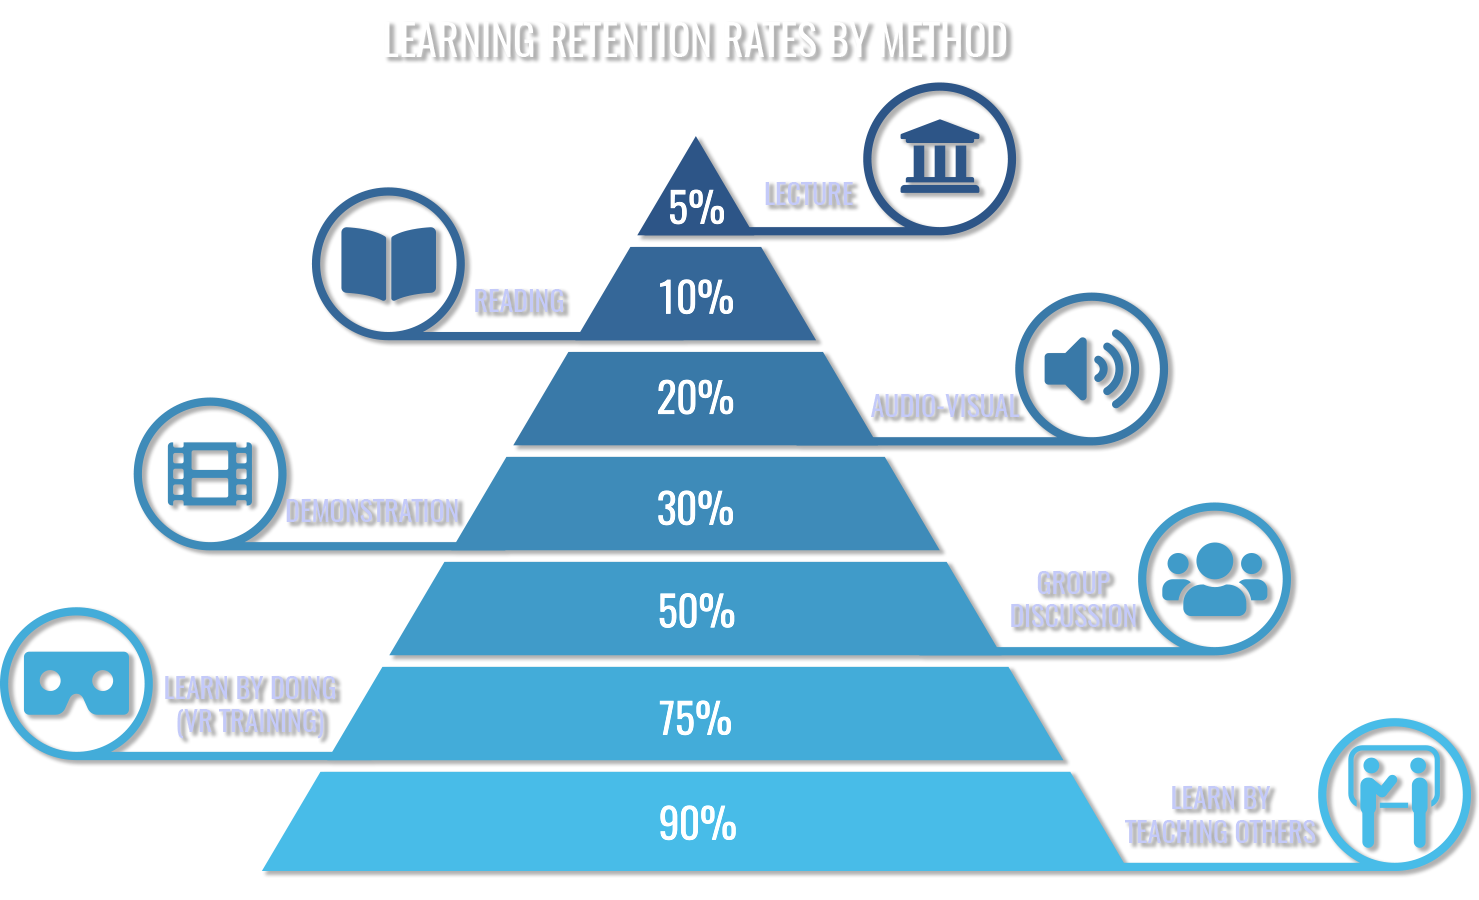 Learning Retention Rates by Method